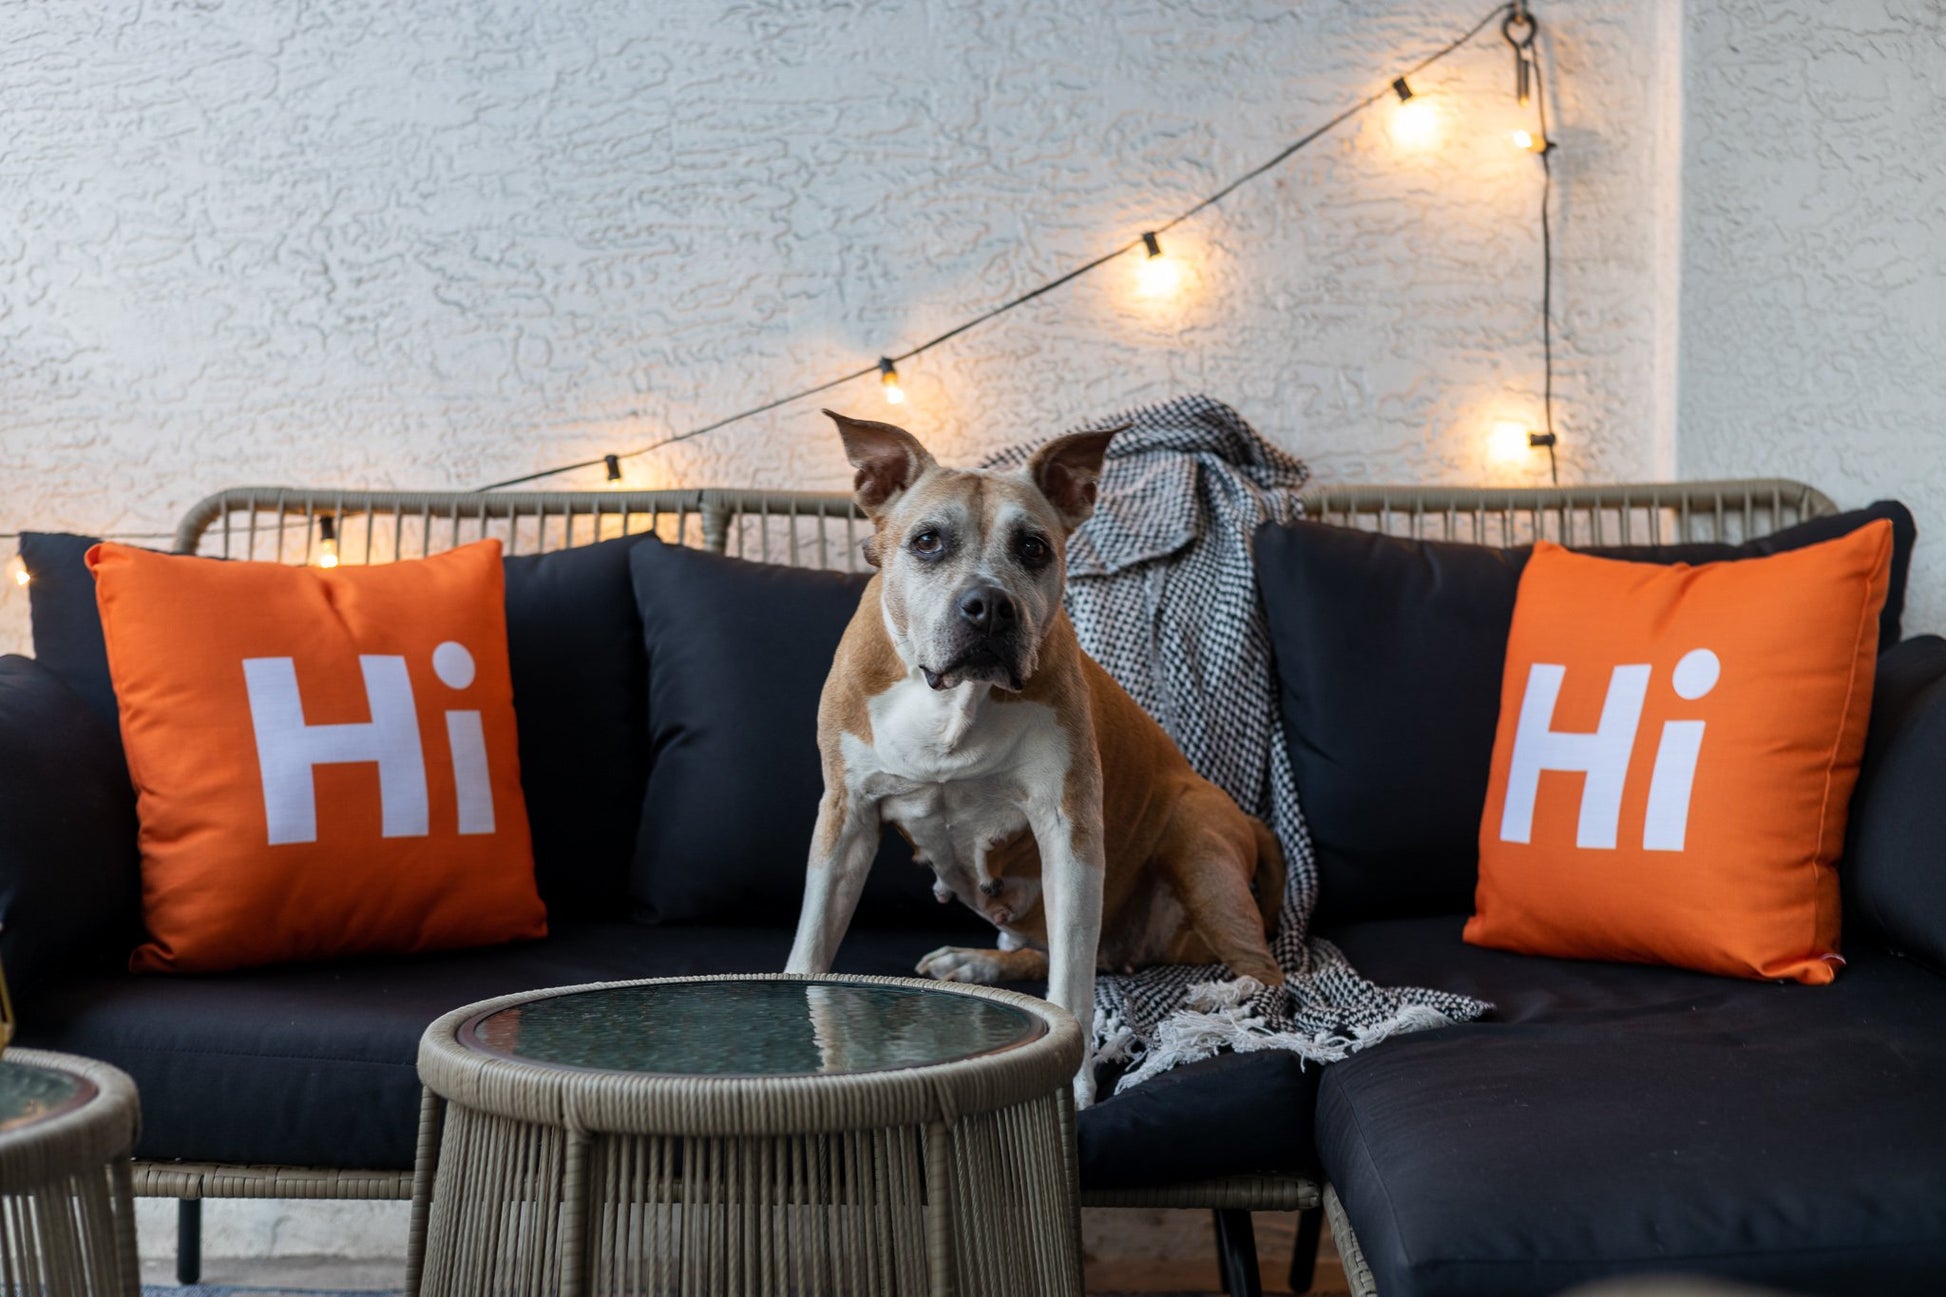 Hi Pillow by Hi Johnny in Hola Orange on a patio balcony with Duffy The Dog